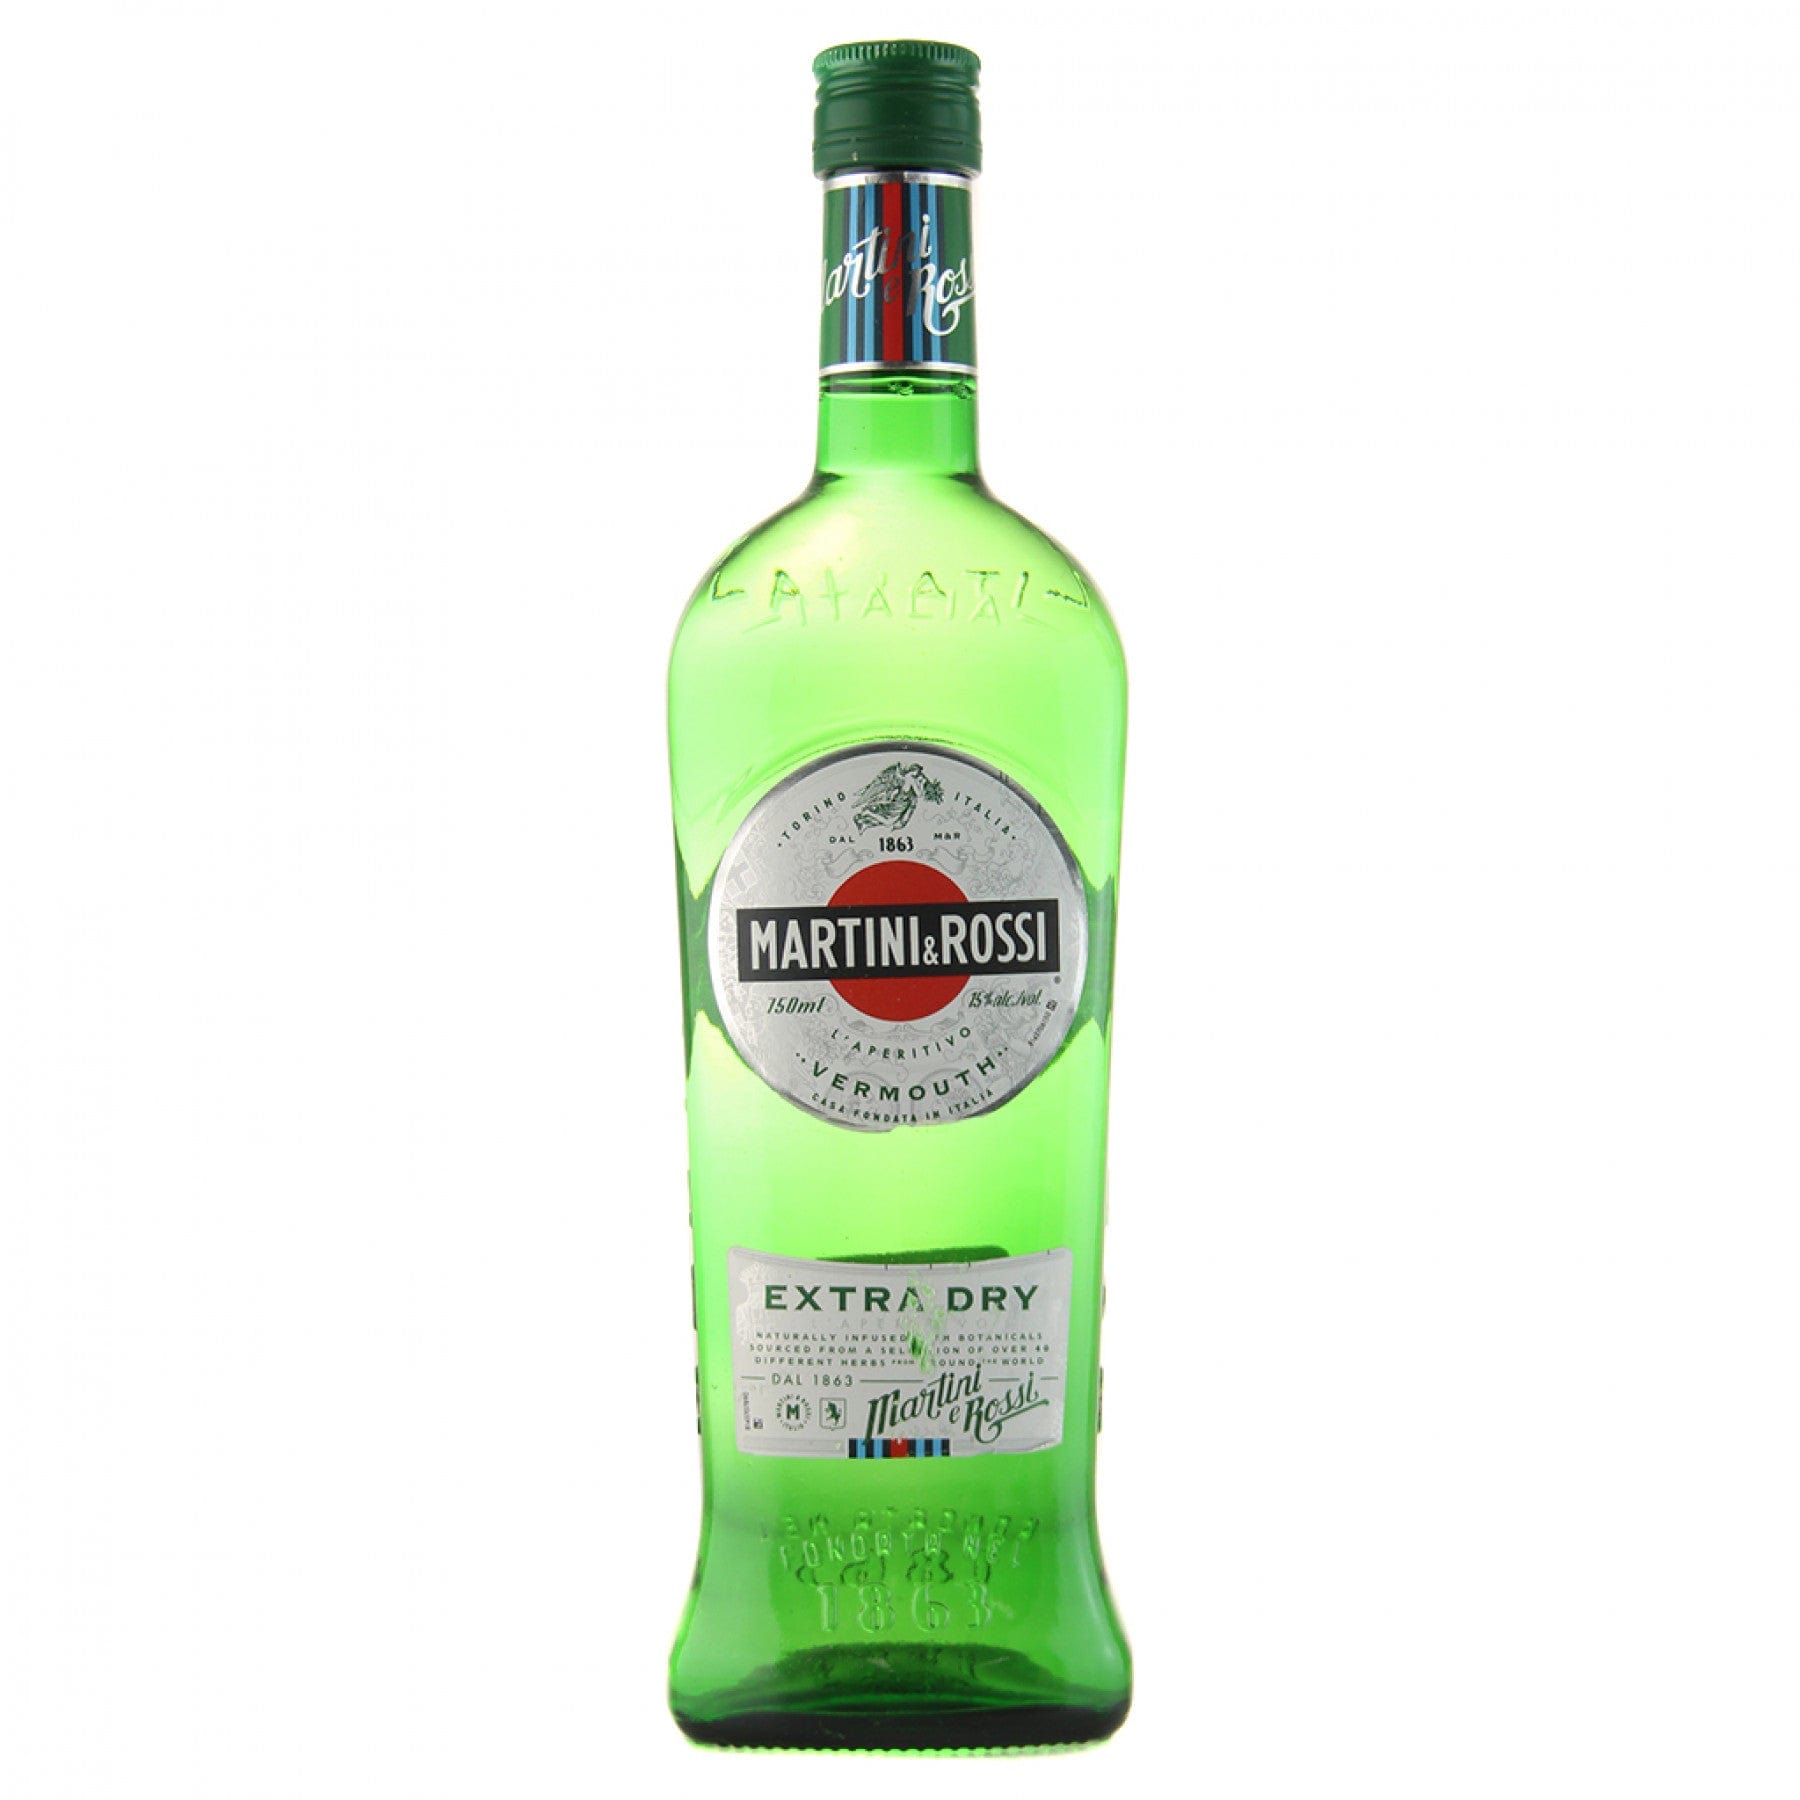 MARTINI & ROSSI VERMOUTH EXTRA DRY 750ML – Banks Wines & Spirits